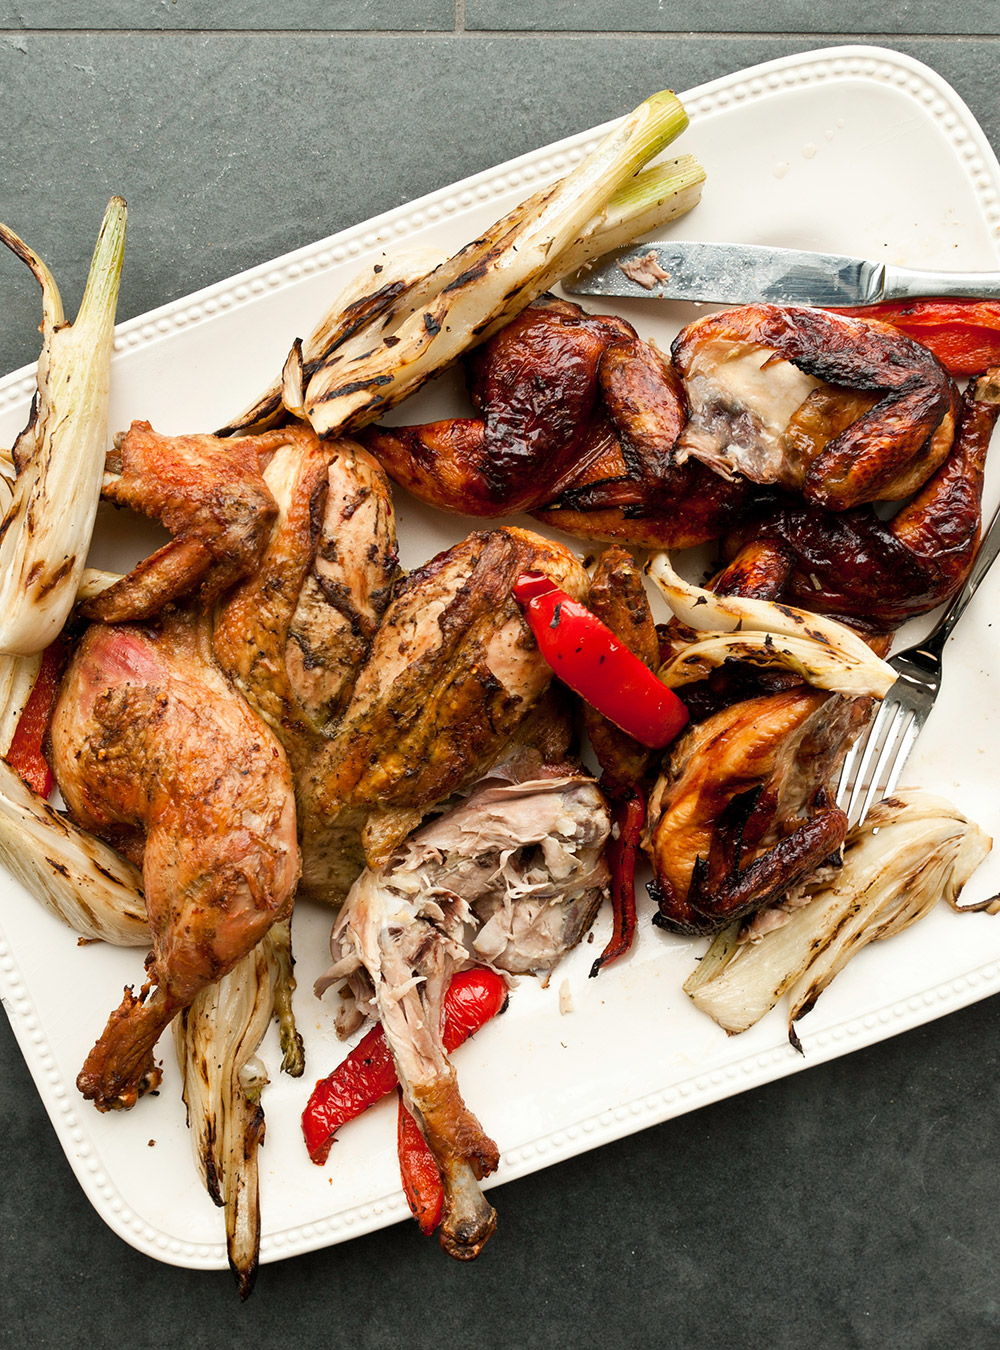 Pierre Gingras’ Grilled Cornish Hens